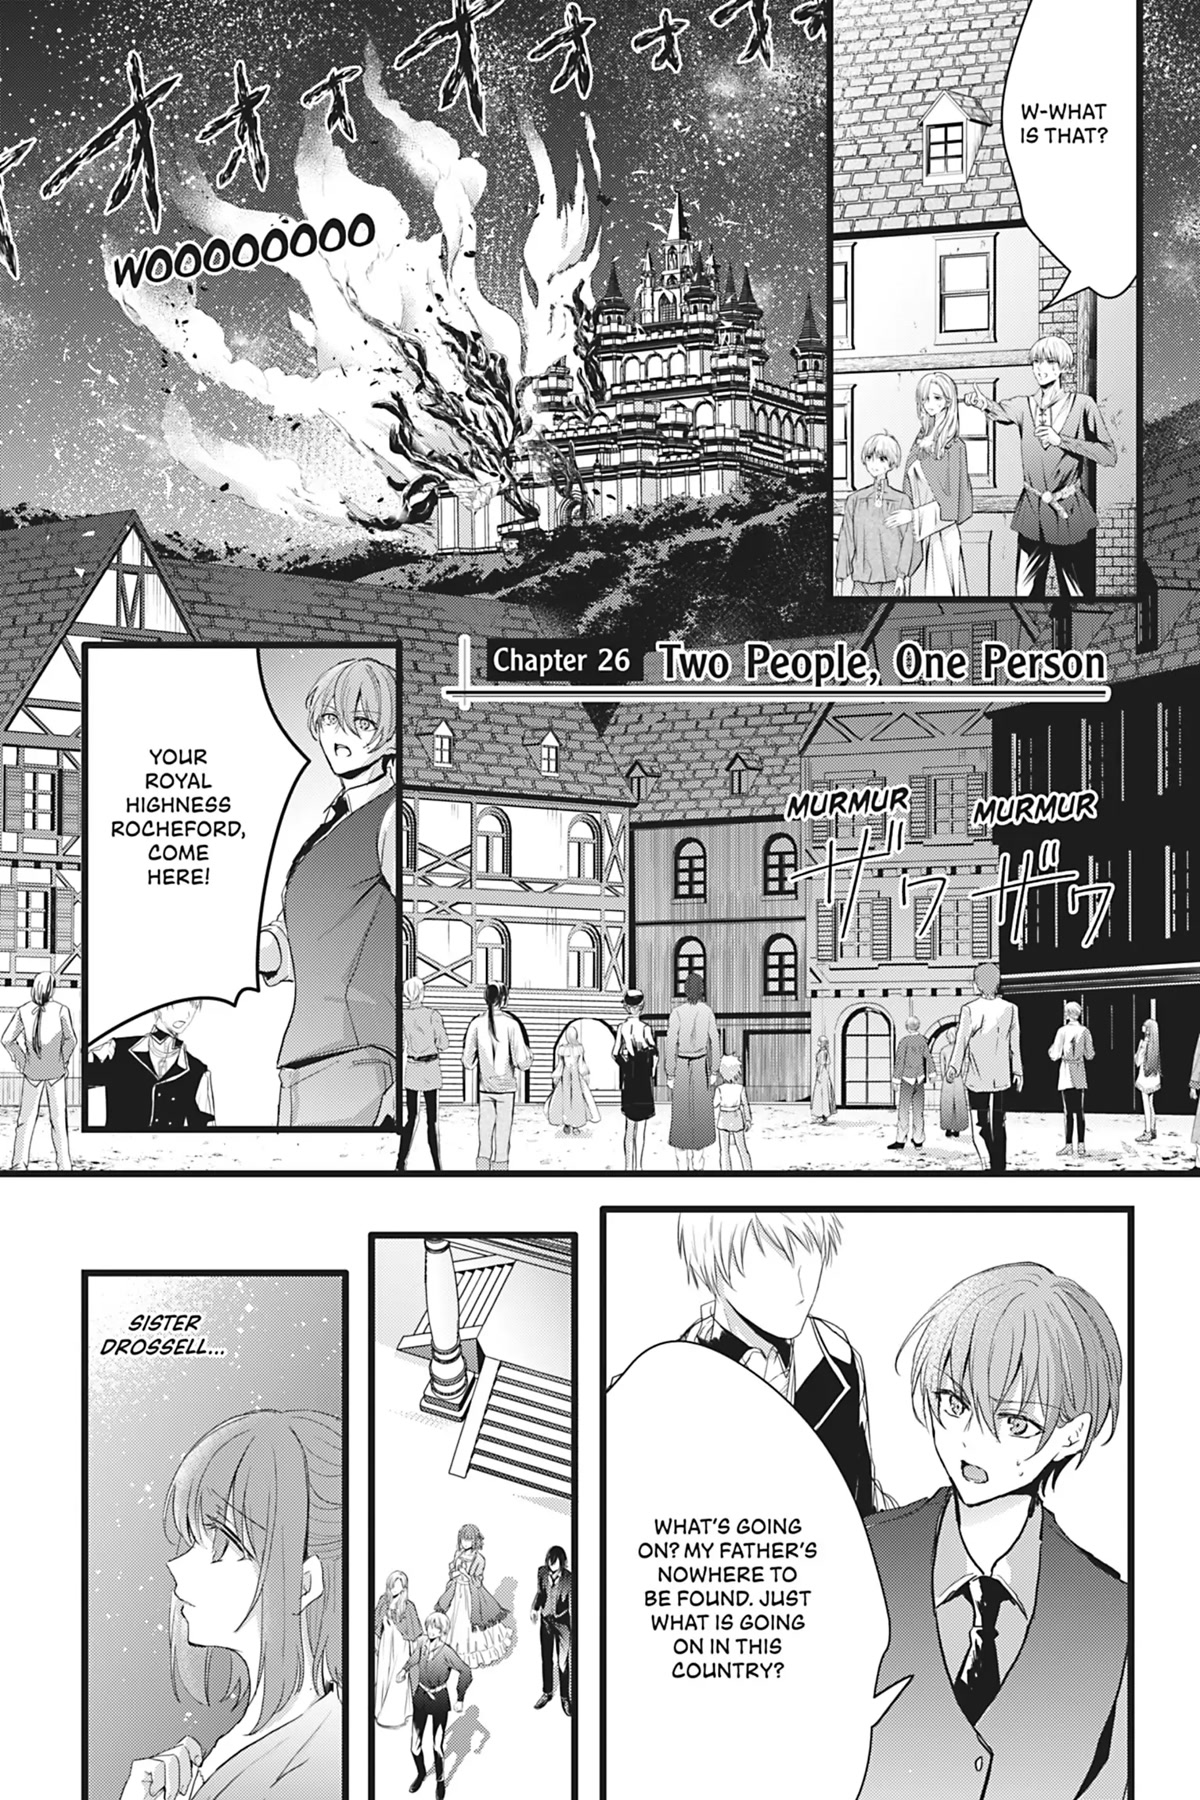 Her Royal Highness Seems To Be Angry - Page 1